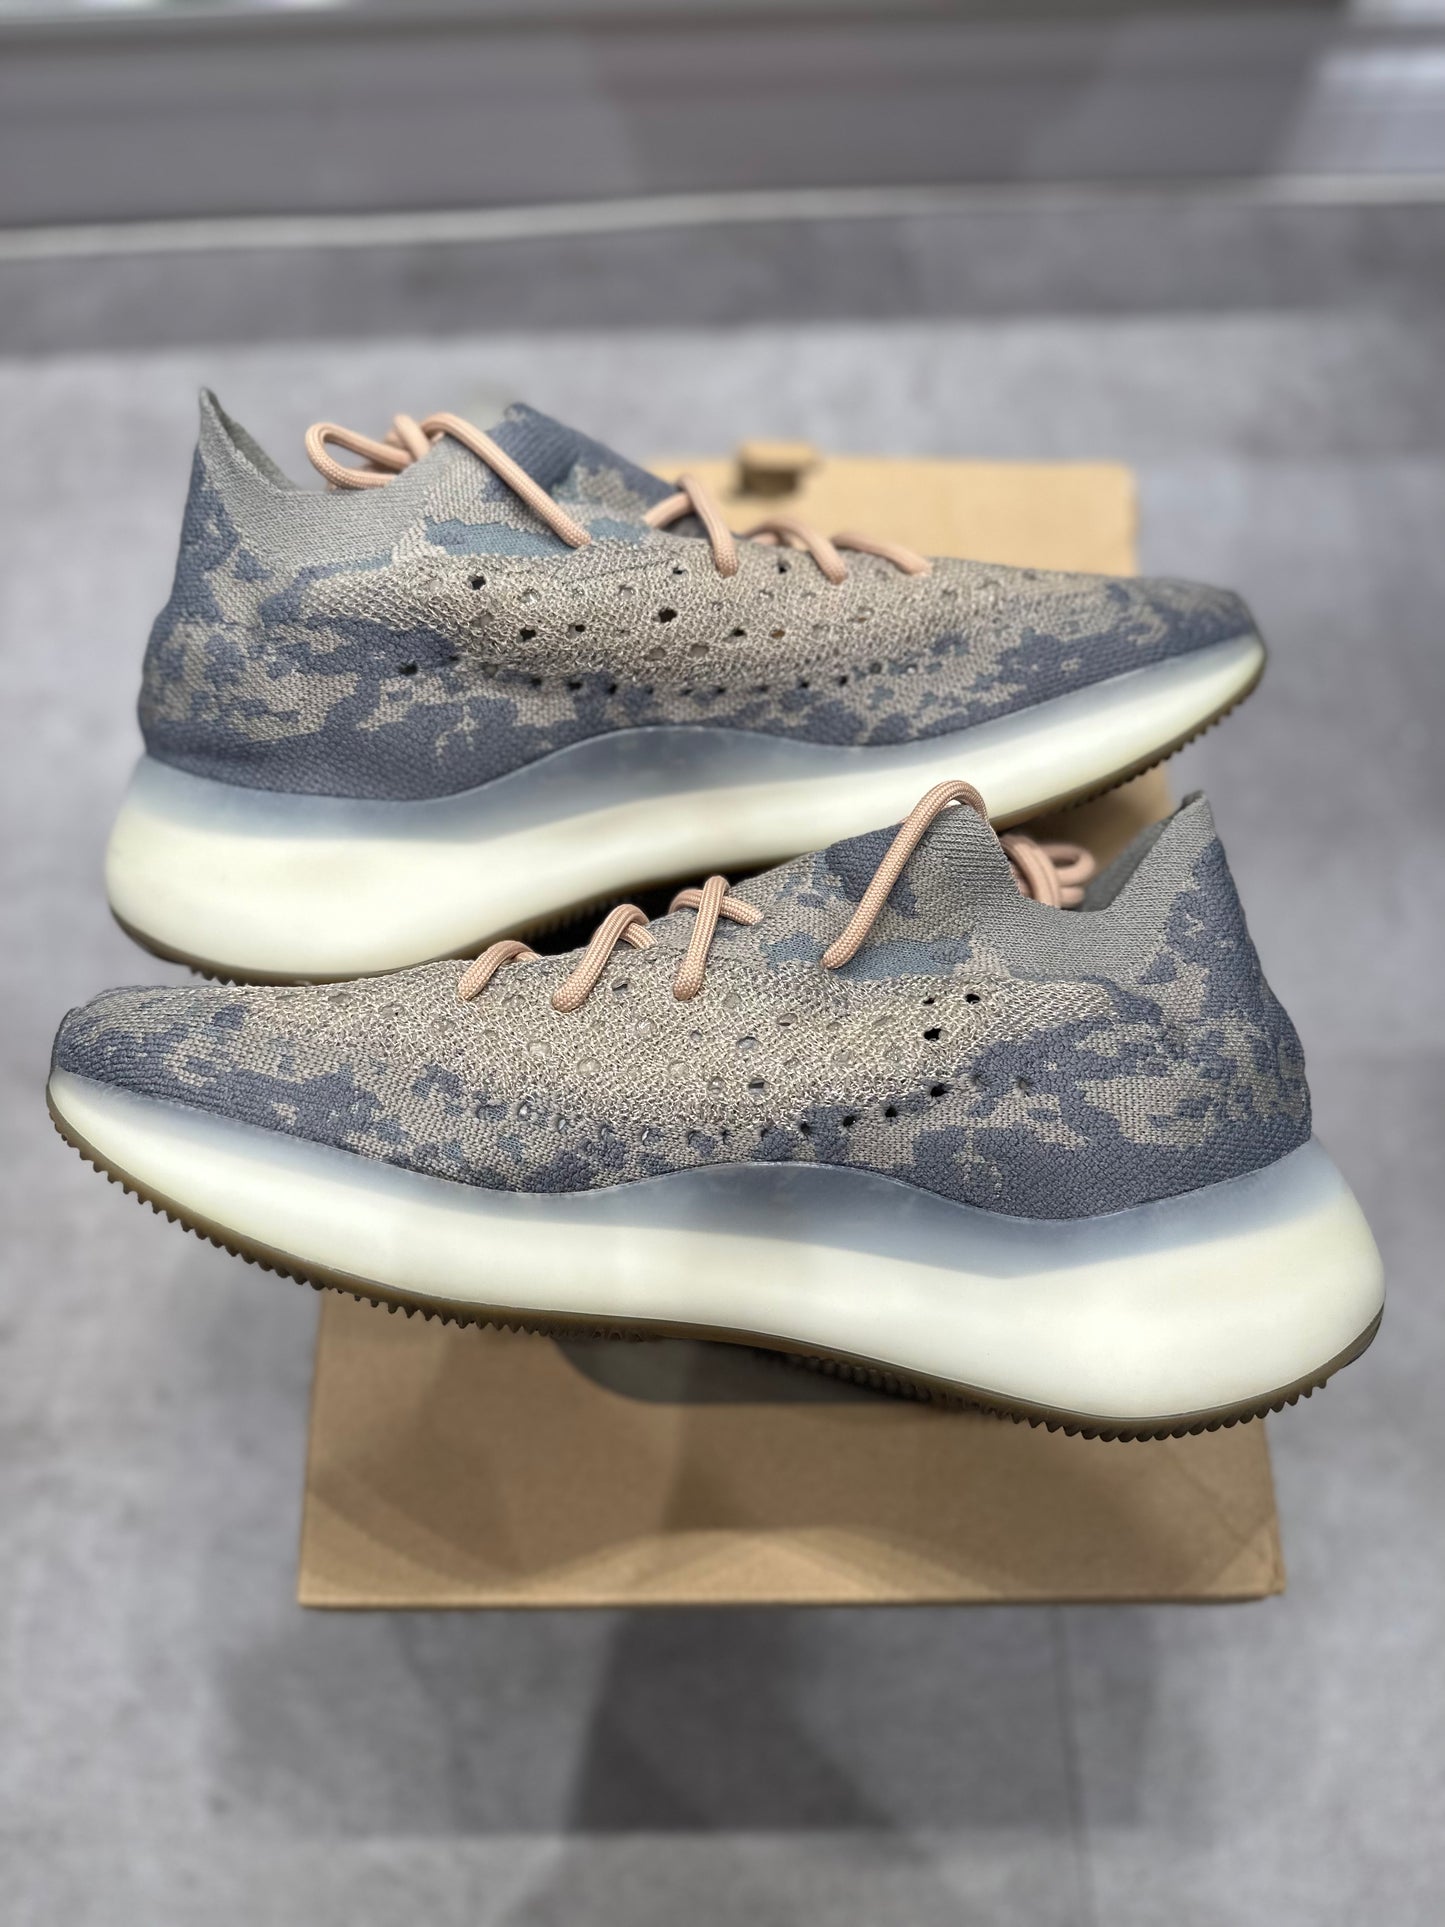 Adidas Yeezy Boost 380 Mist (Preowned)